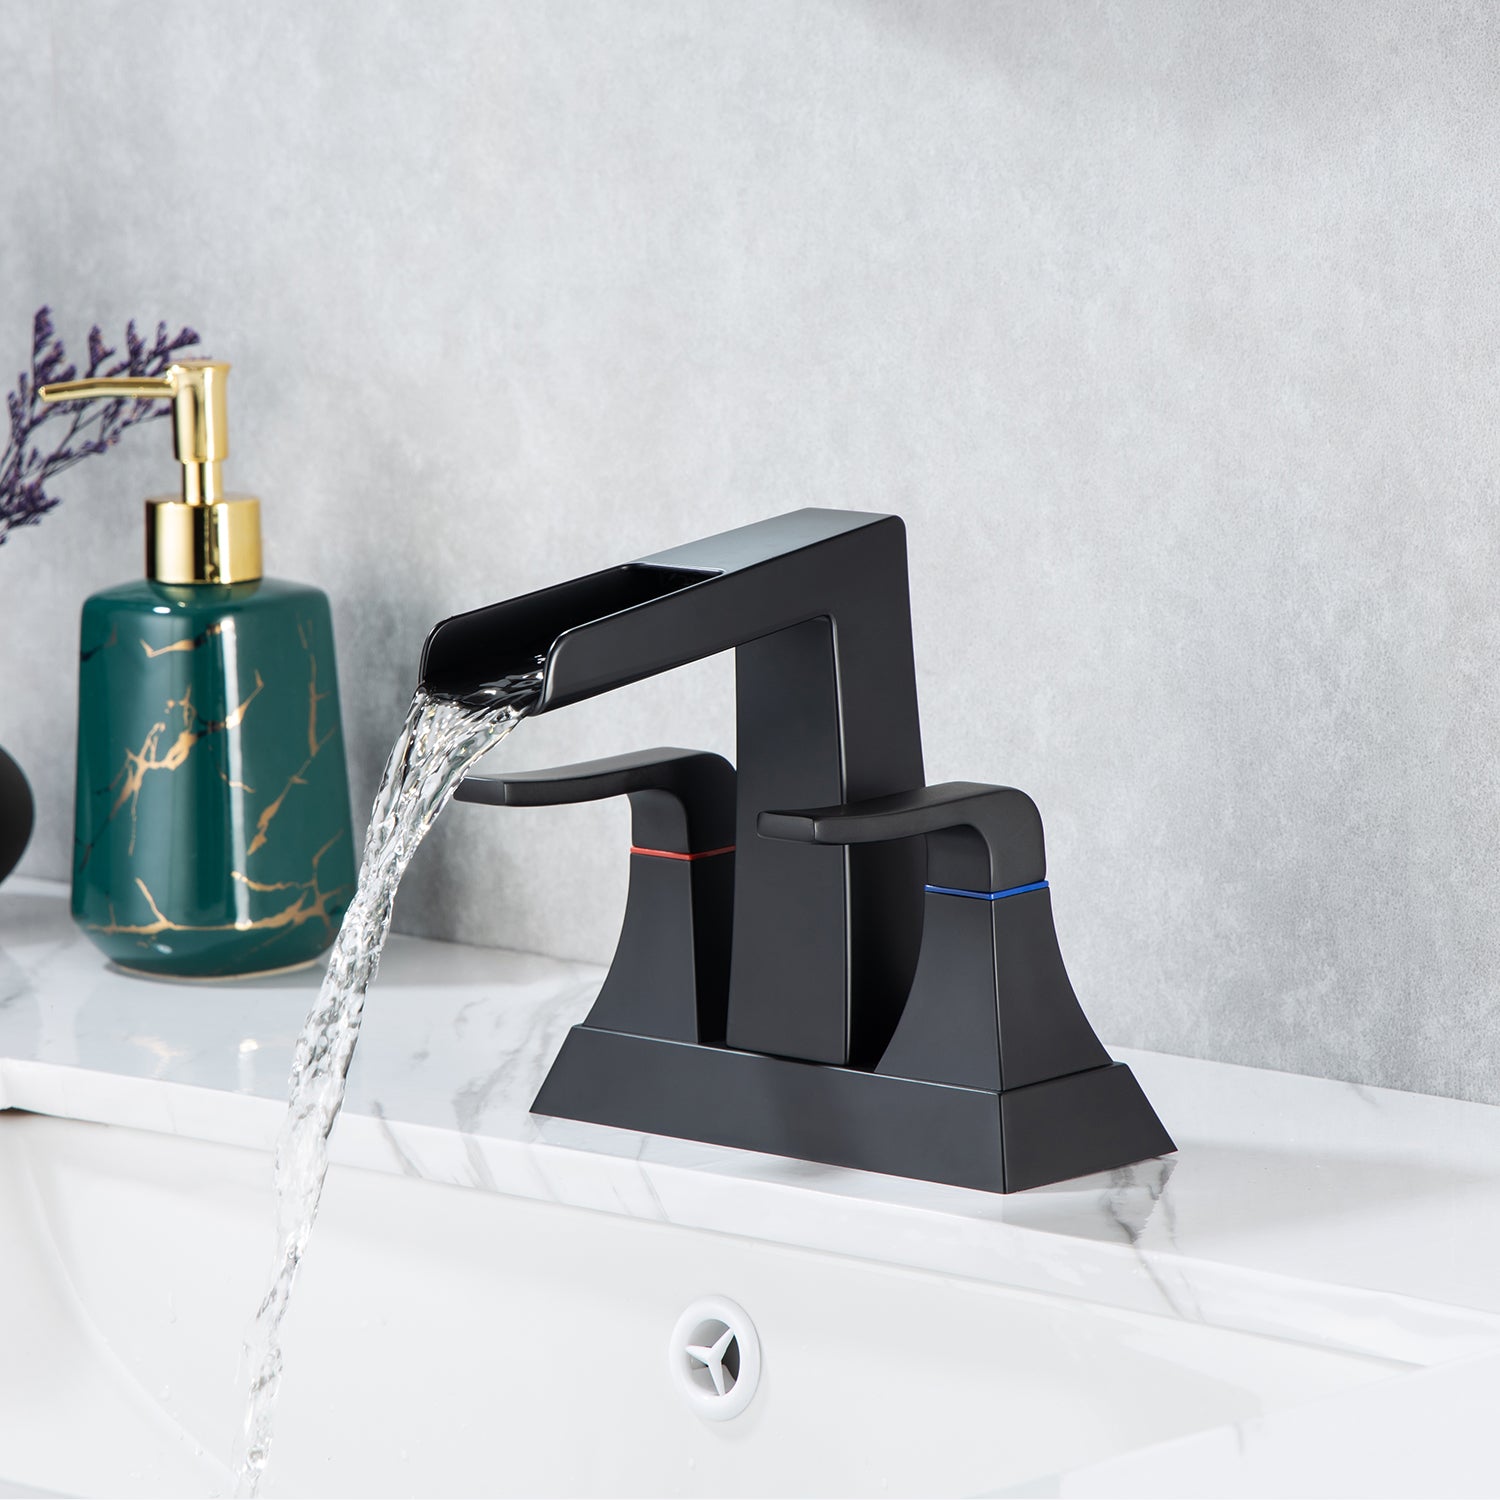 [Rainlex 3002] Waterfall Lavatory Centerset Faucet With Drain Assembly And Water Supply Line